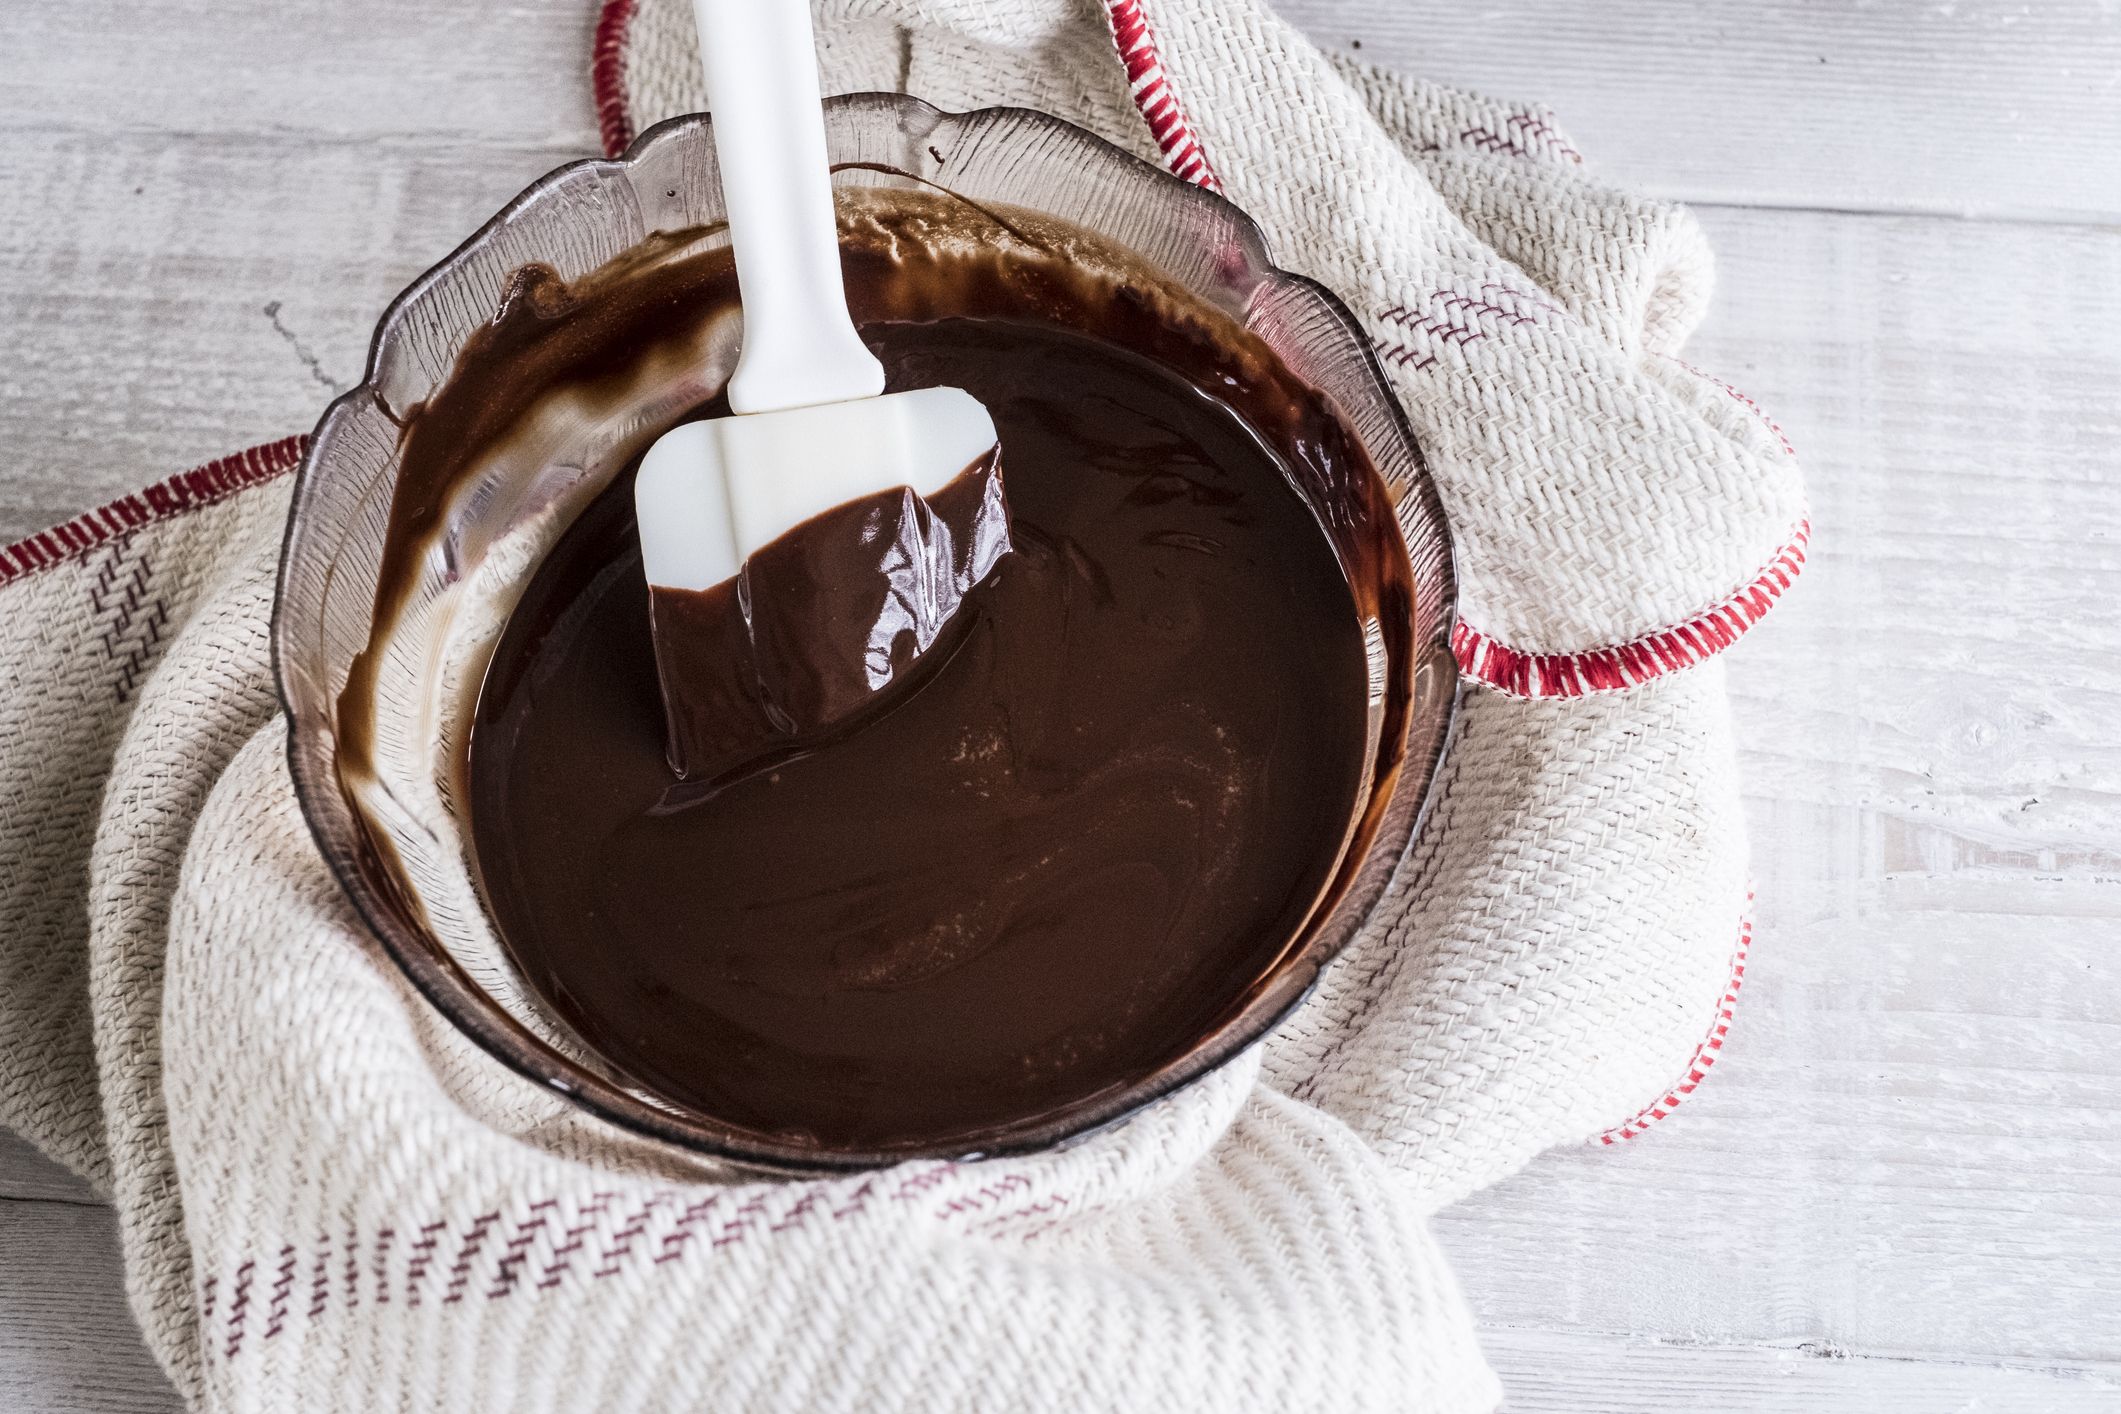 How To Melt Chocolate In The Microwave How To Melt Chocolate According To Culinary Experts,Antiques Near Me